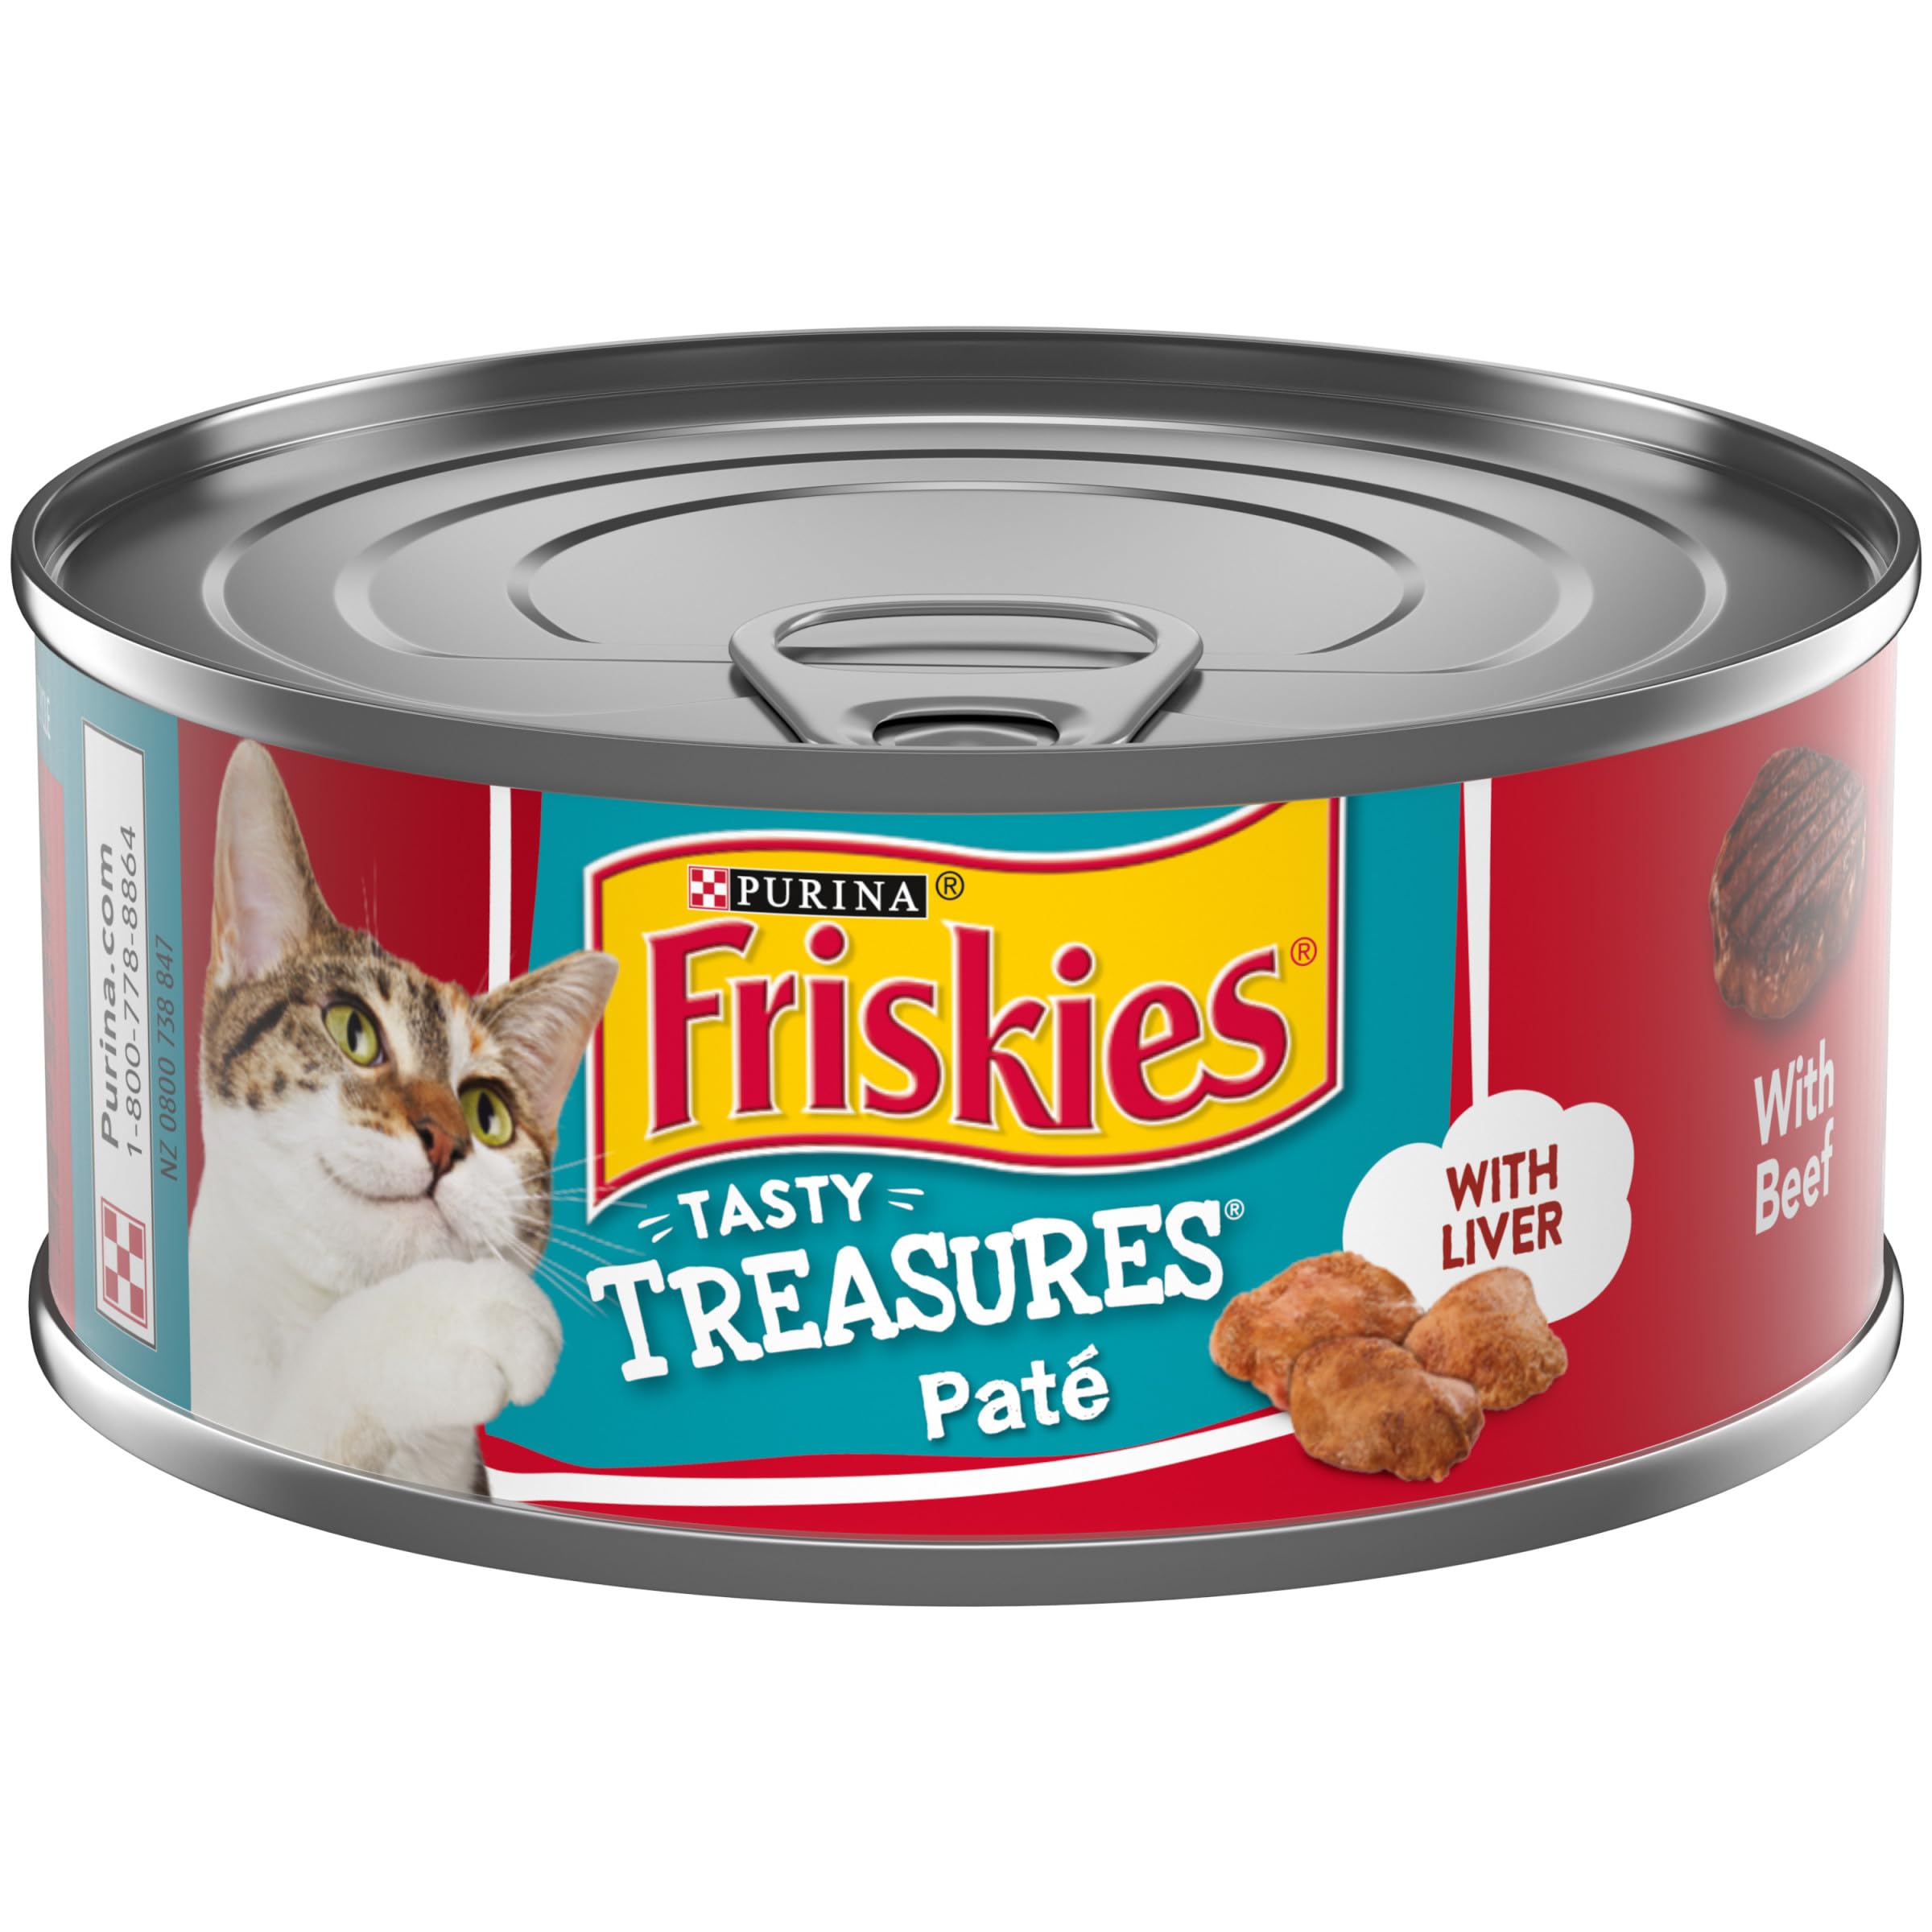 Purina Friskies Tasty Treasures Beef Liver and Cheese Pate Canned Cat Food - 5.5 Oz - Case of 24  